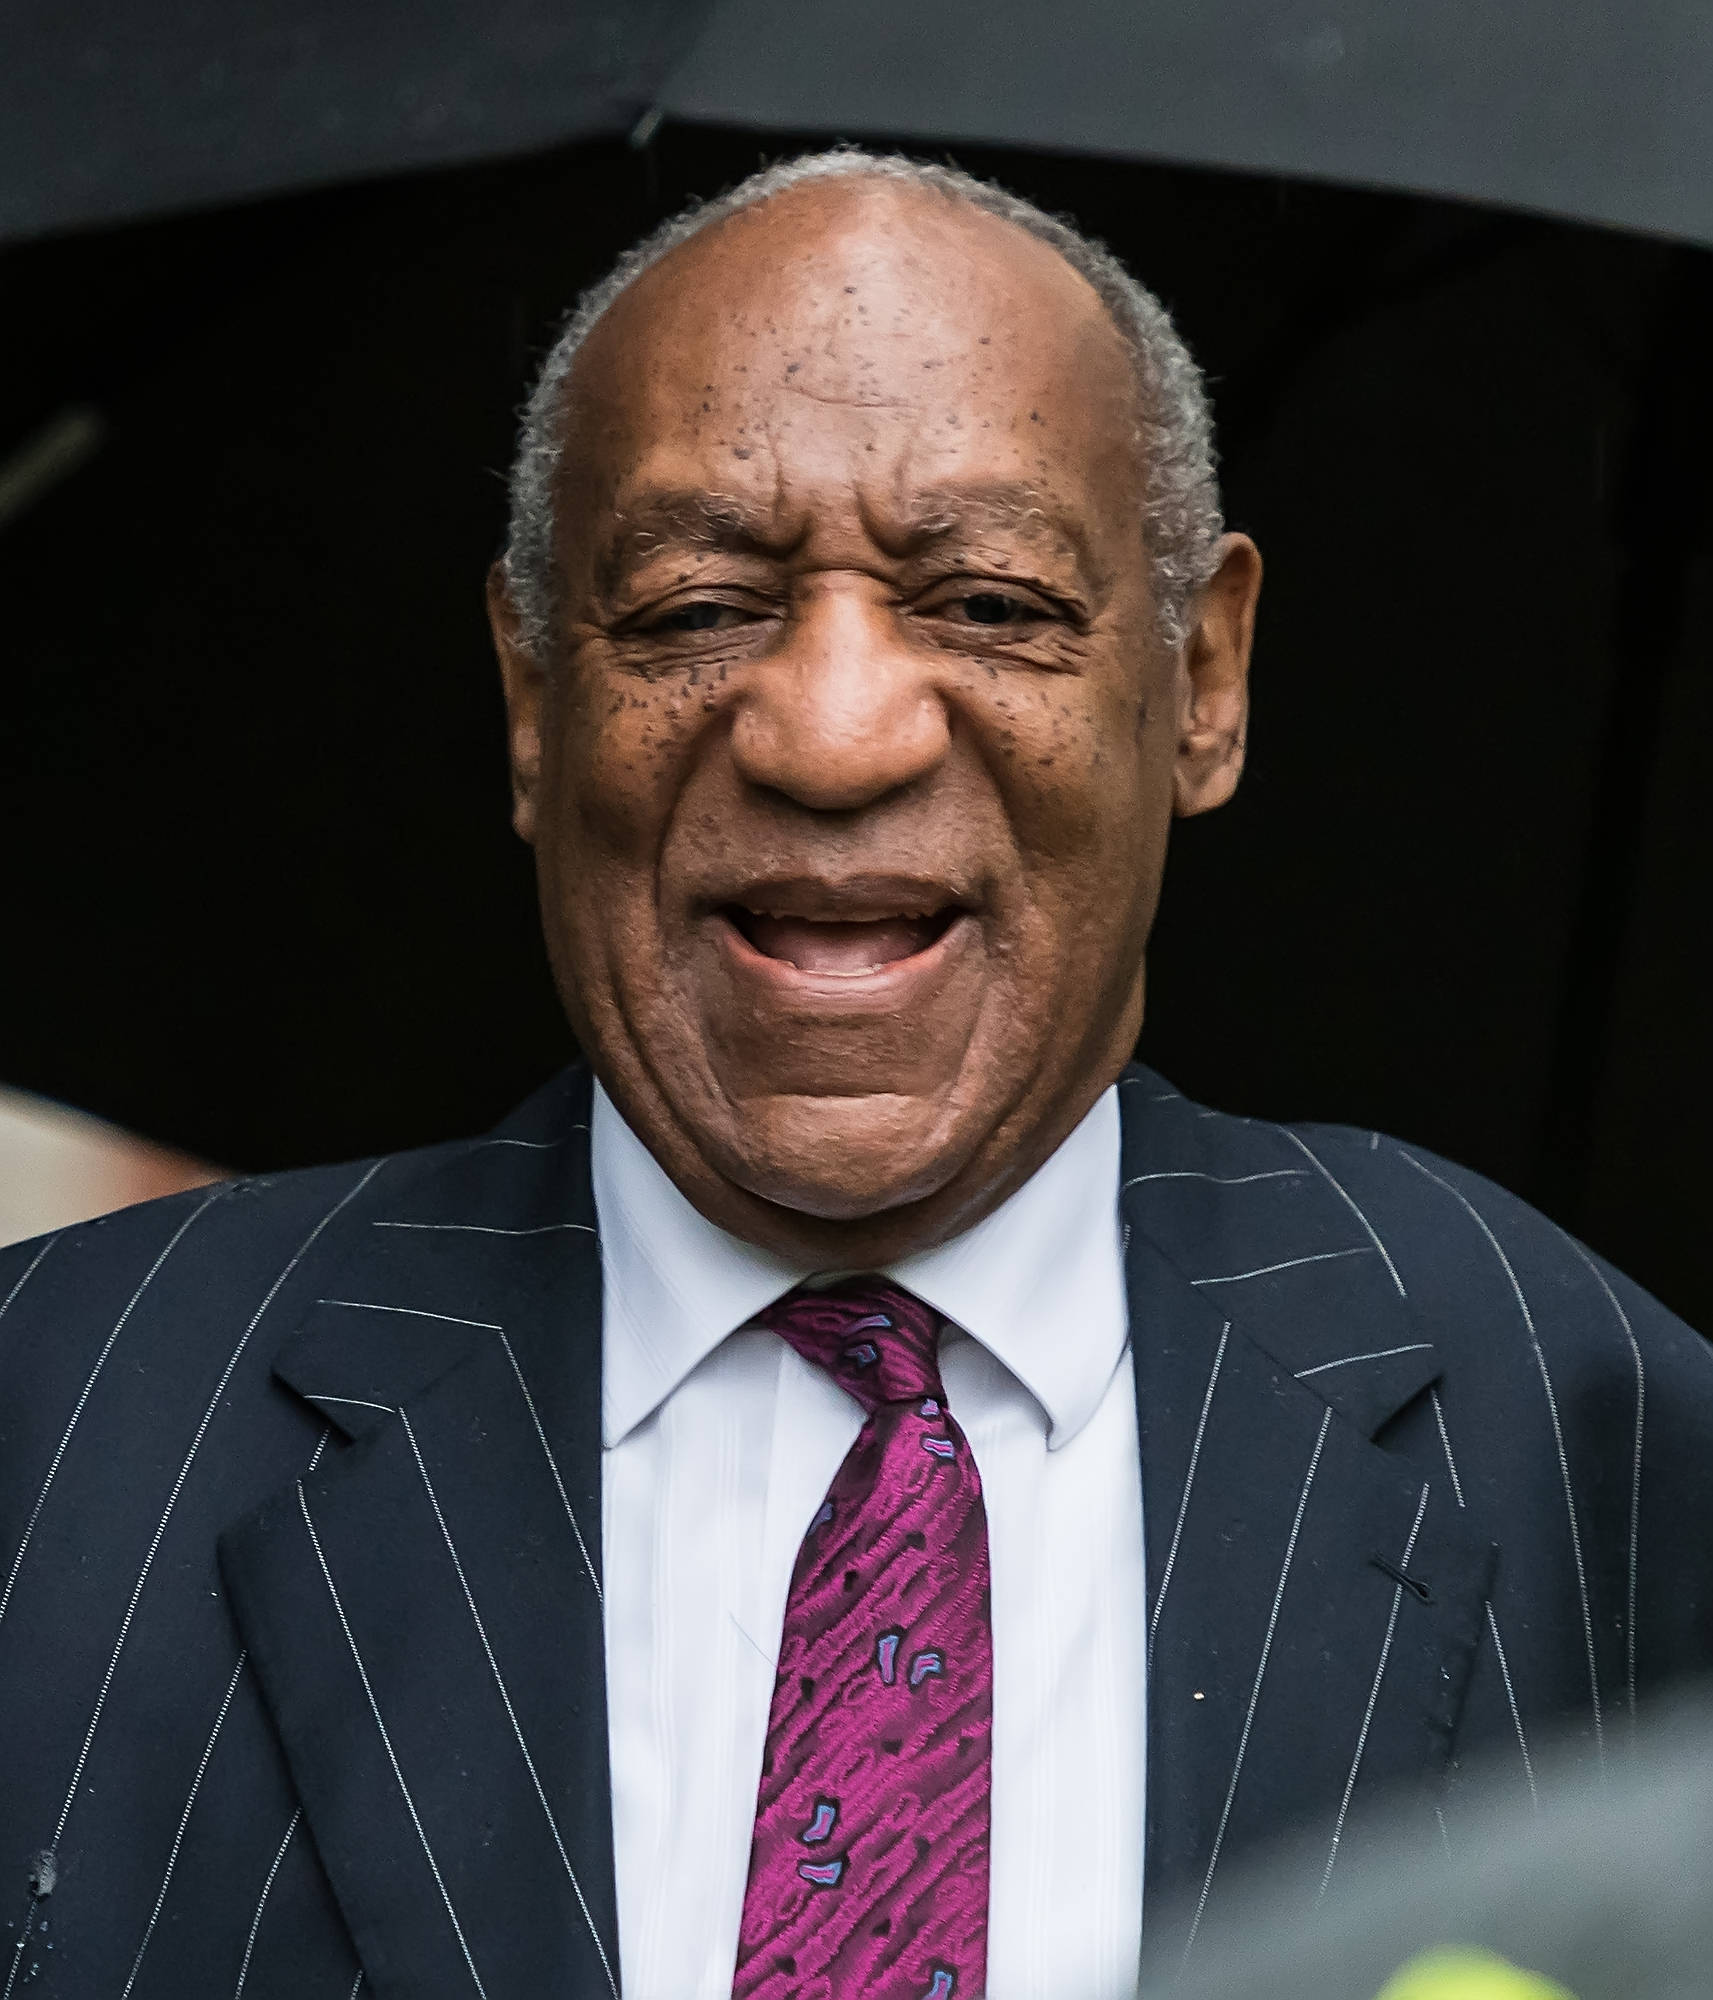 Bill Cosby at the Montgomery County Courthouse on September 25, 2018, in Norristown, Pennsylvania. | Source: Getty Images